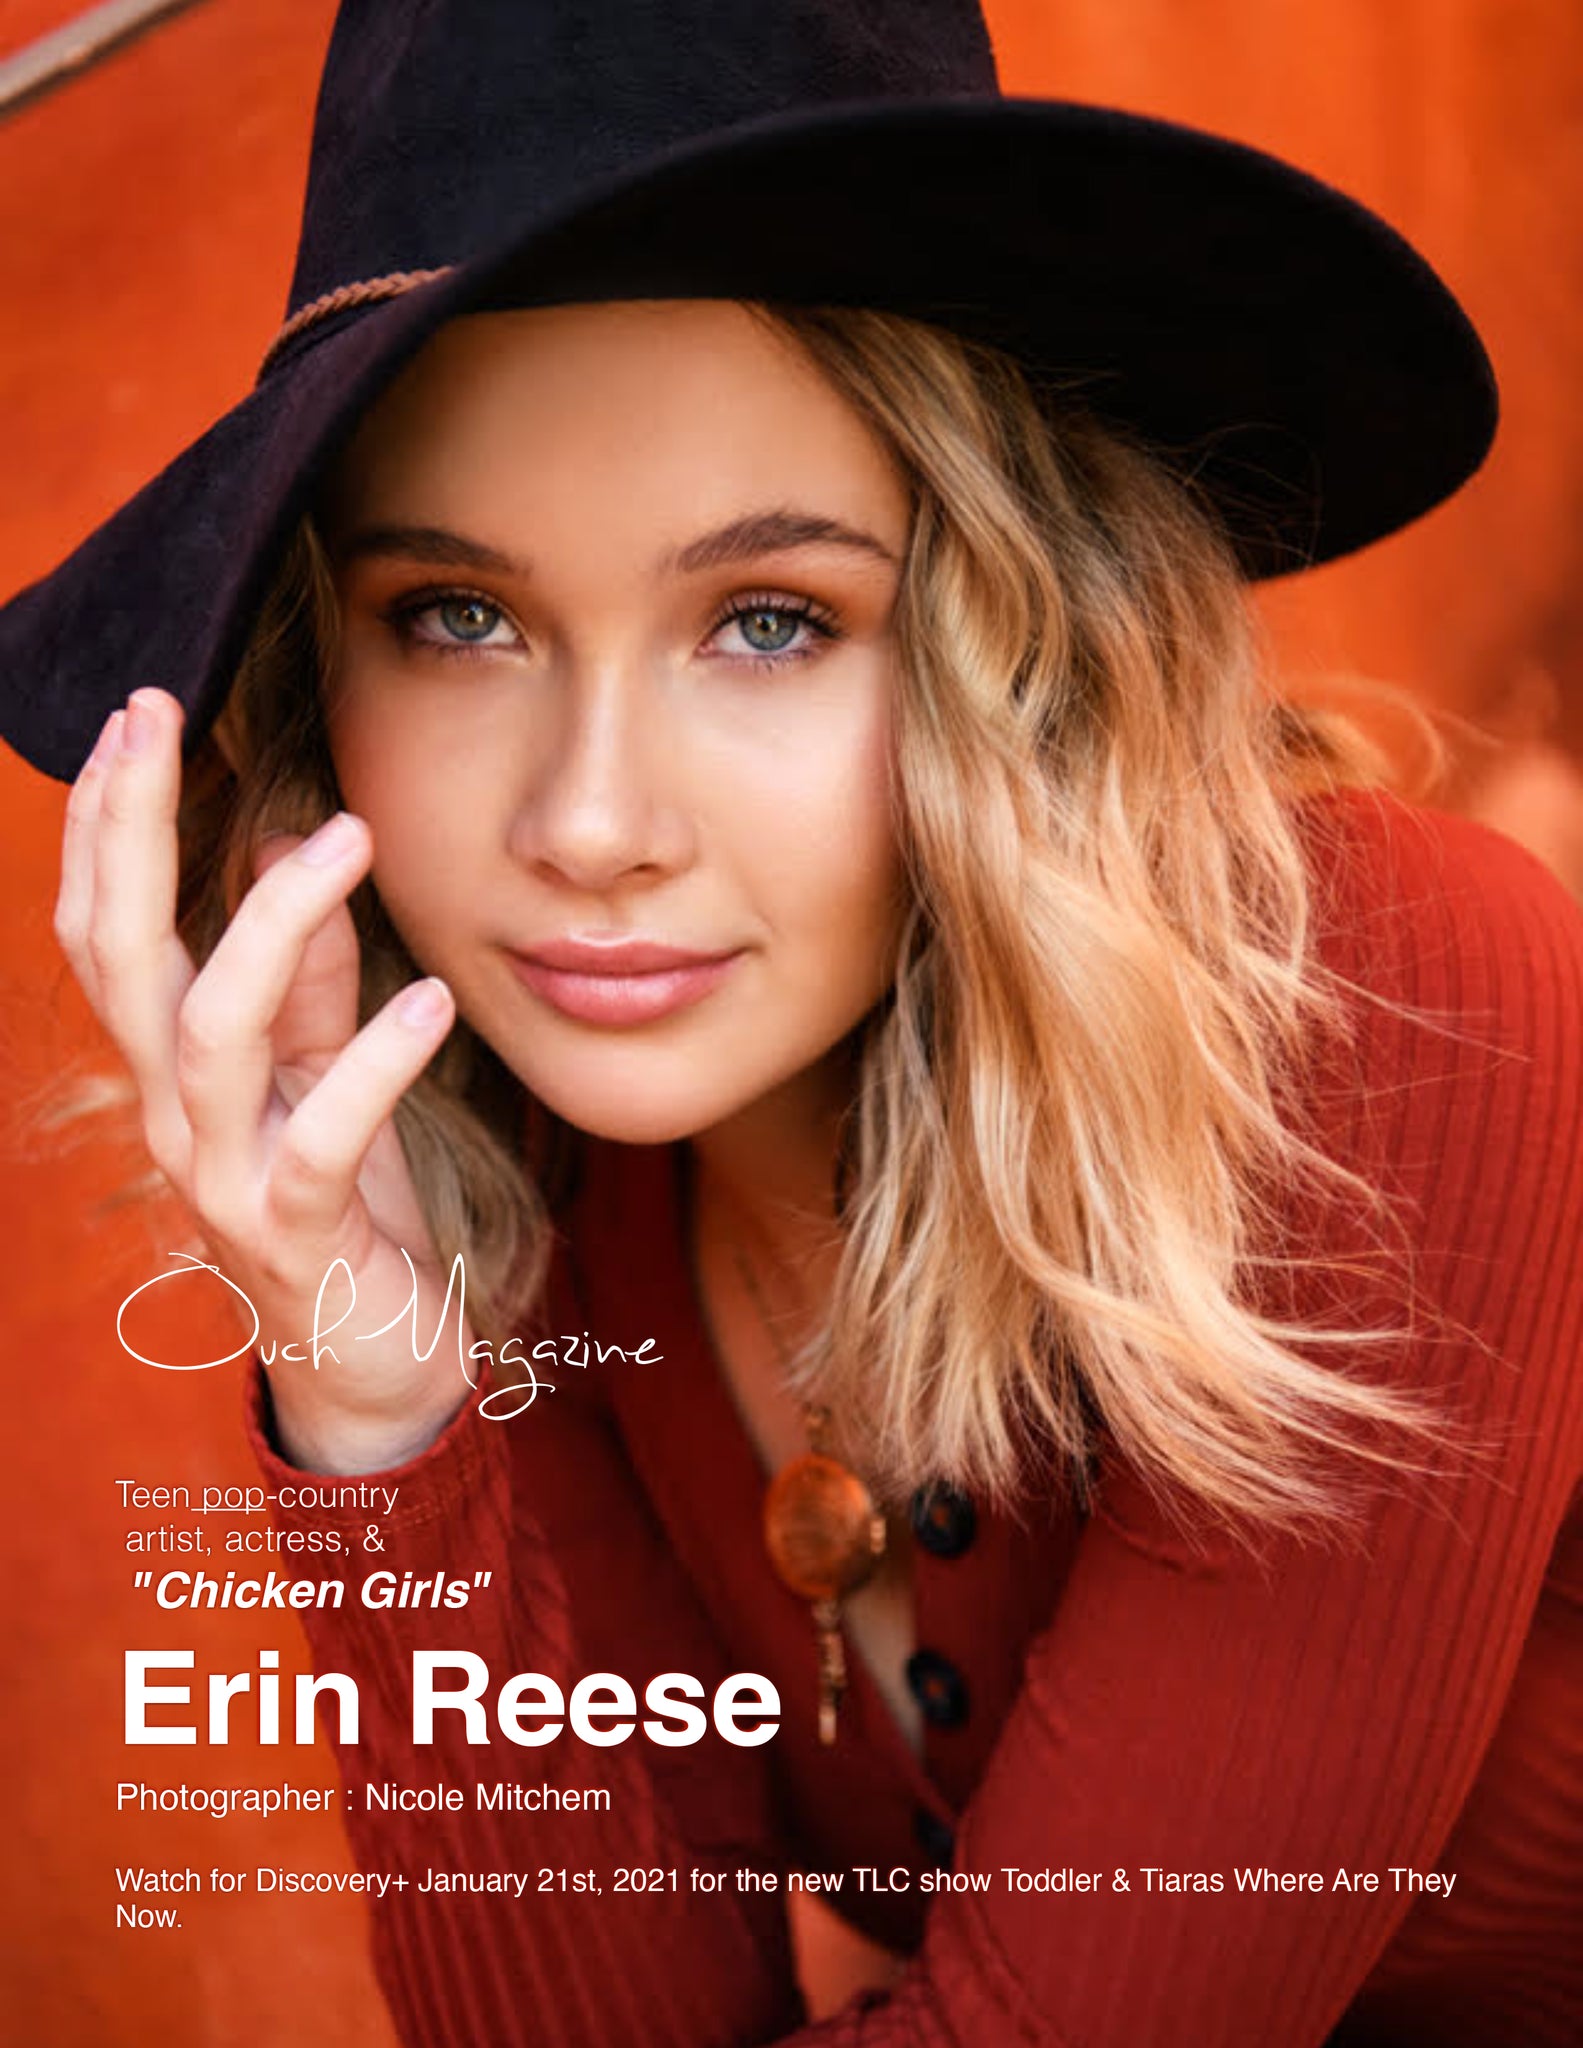 Pop Star and Actress Erin Reese